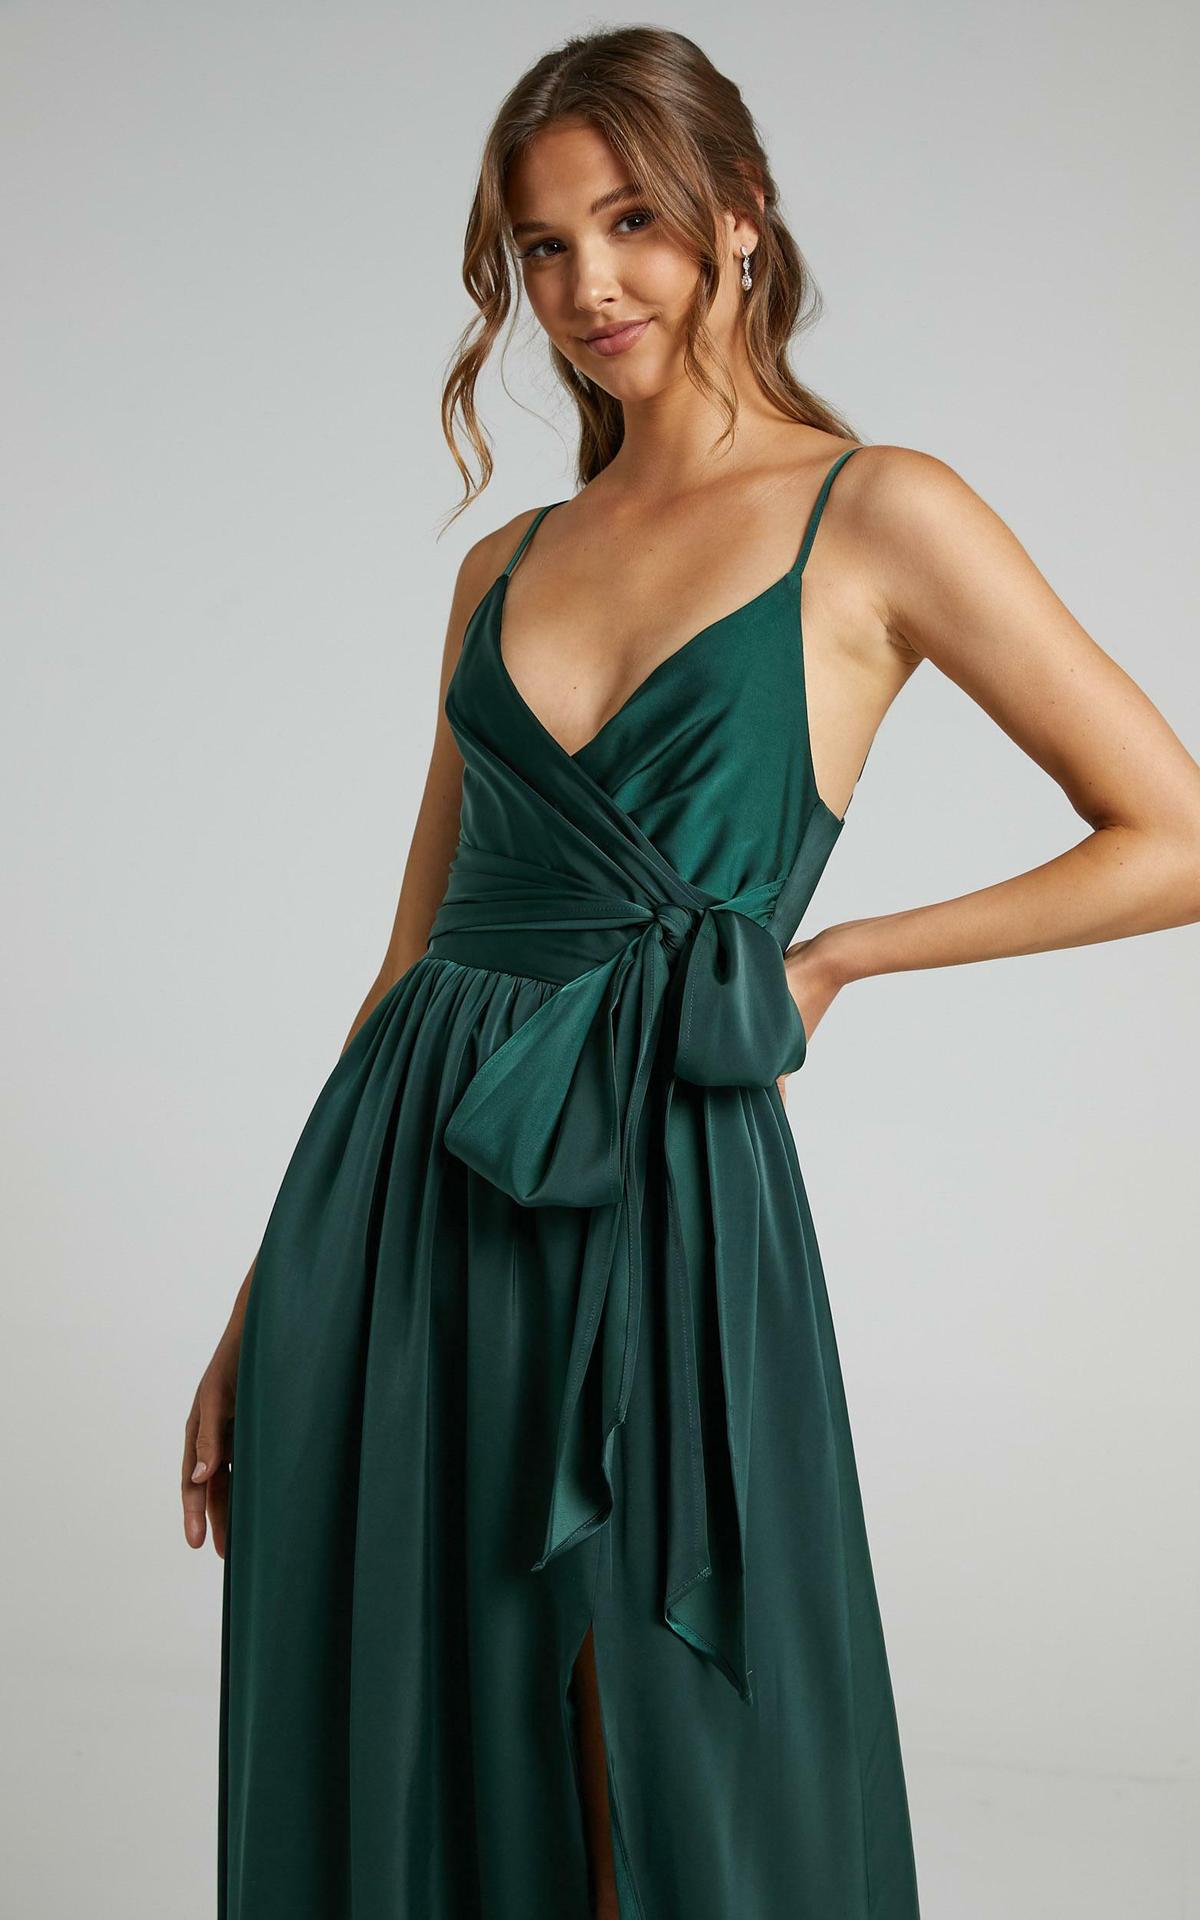 Limelight Satin High Low Maxi Dress - Olive Ins Street